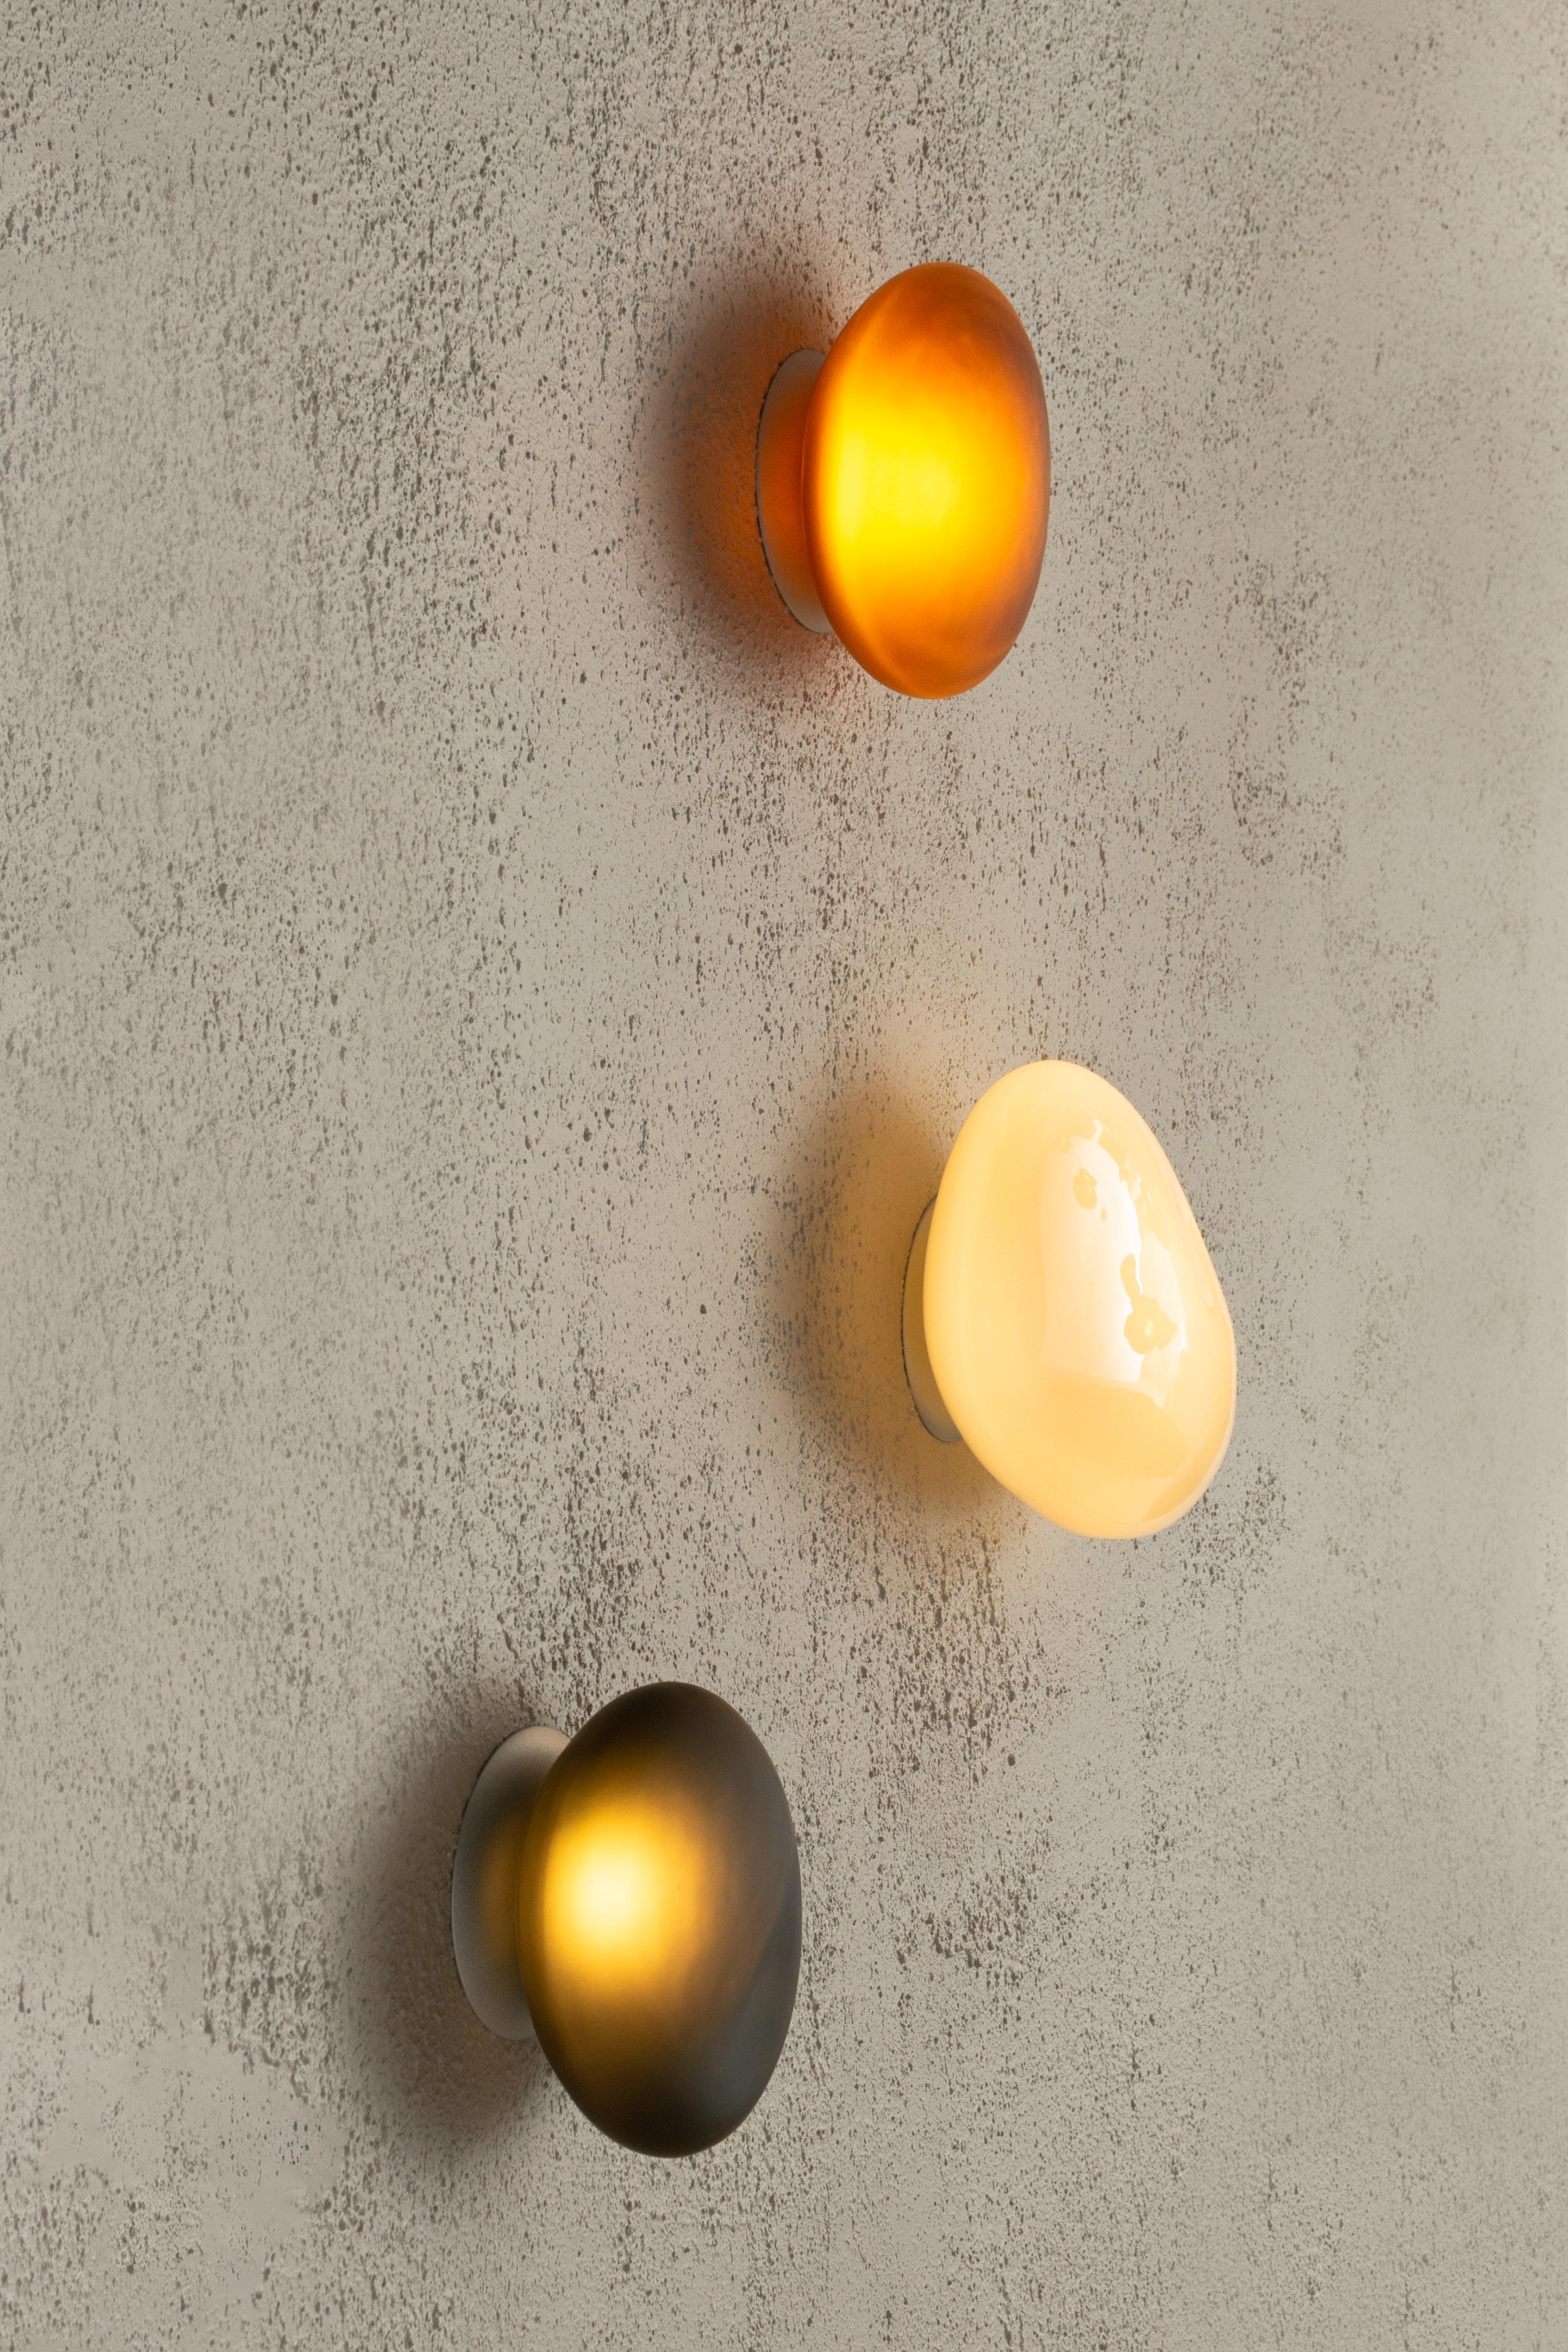 Contemporary wall lamp Pebble 

Electrical : 
Voltage: 110 – 277V / 220 – 240V
Integral LED source : 1 x 4W LED

The model shown in picture:
Dimensions: C: 23 x 20 x 10 cm 
Color: Citrine
______
Pebble
The Pebble series celebrates the